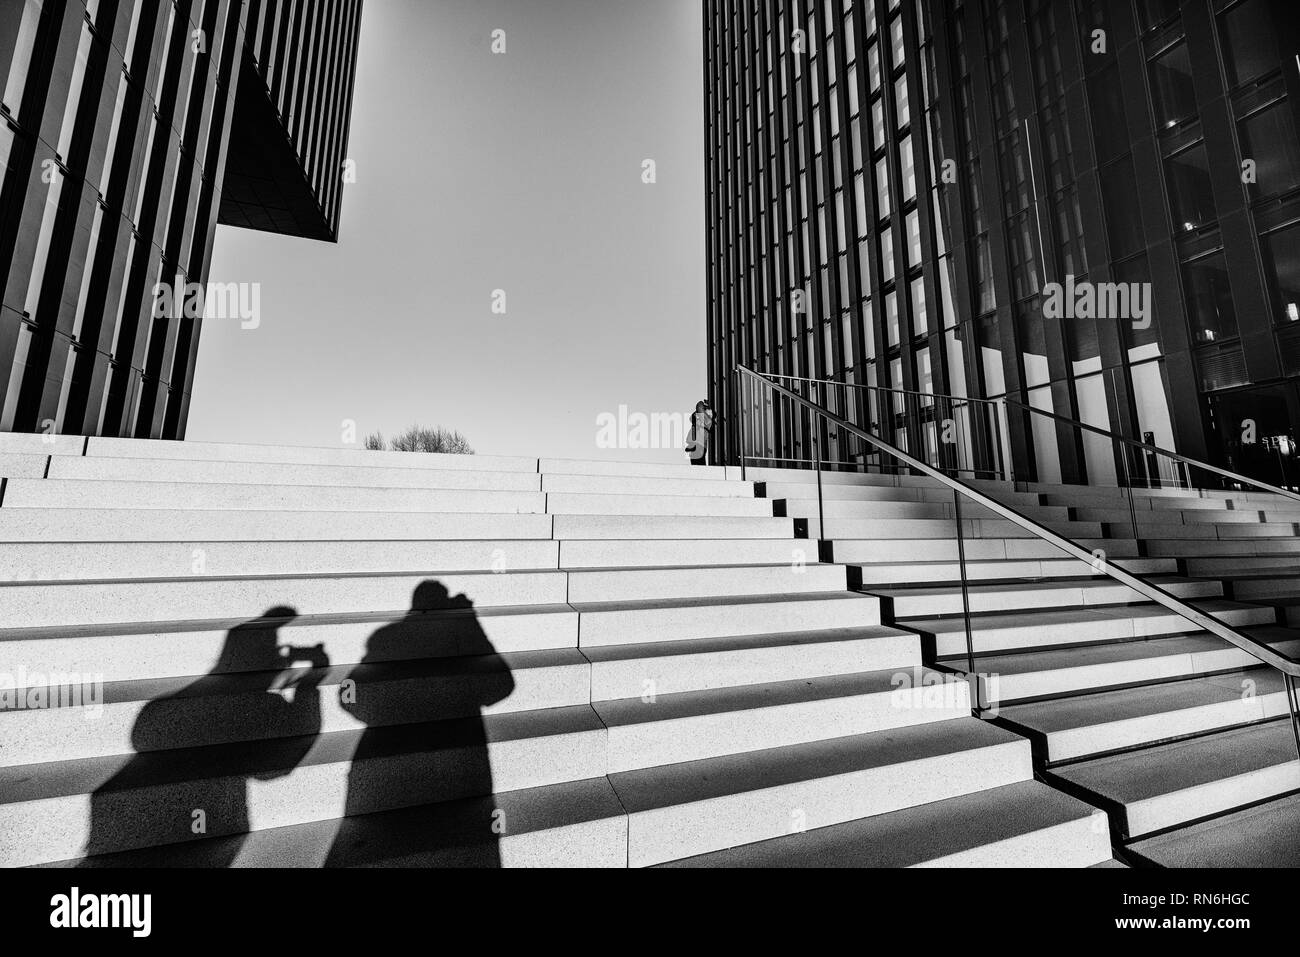 Duesseldorf, GERMANY - January 20, 2019: Modern architecture of New Harbour City throws long and dramatic shadows during sunset captured in B W. Stock Photo